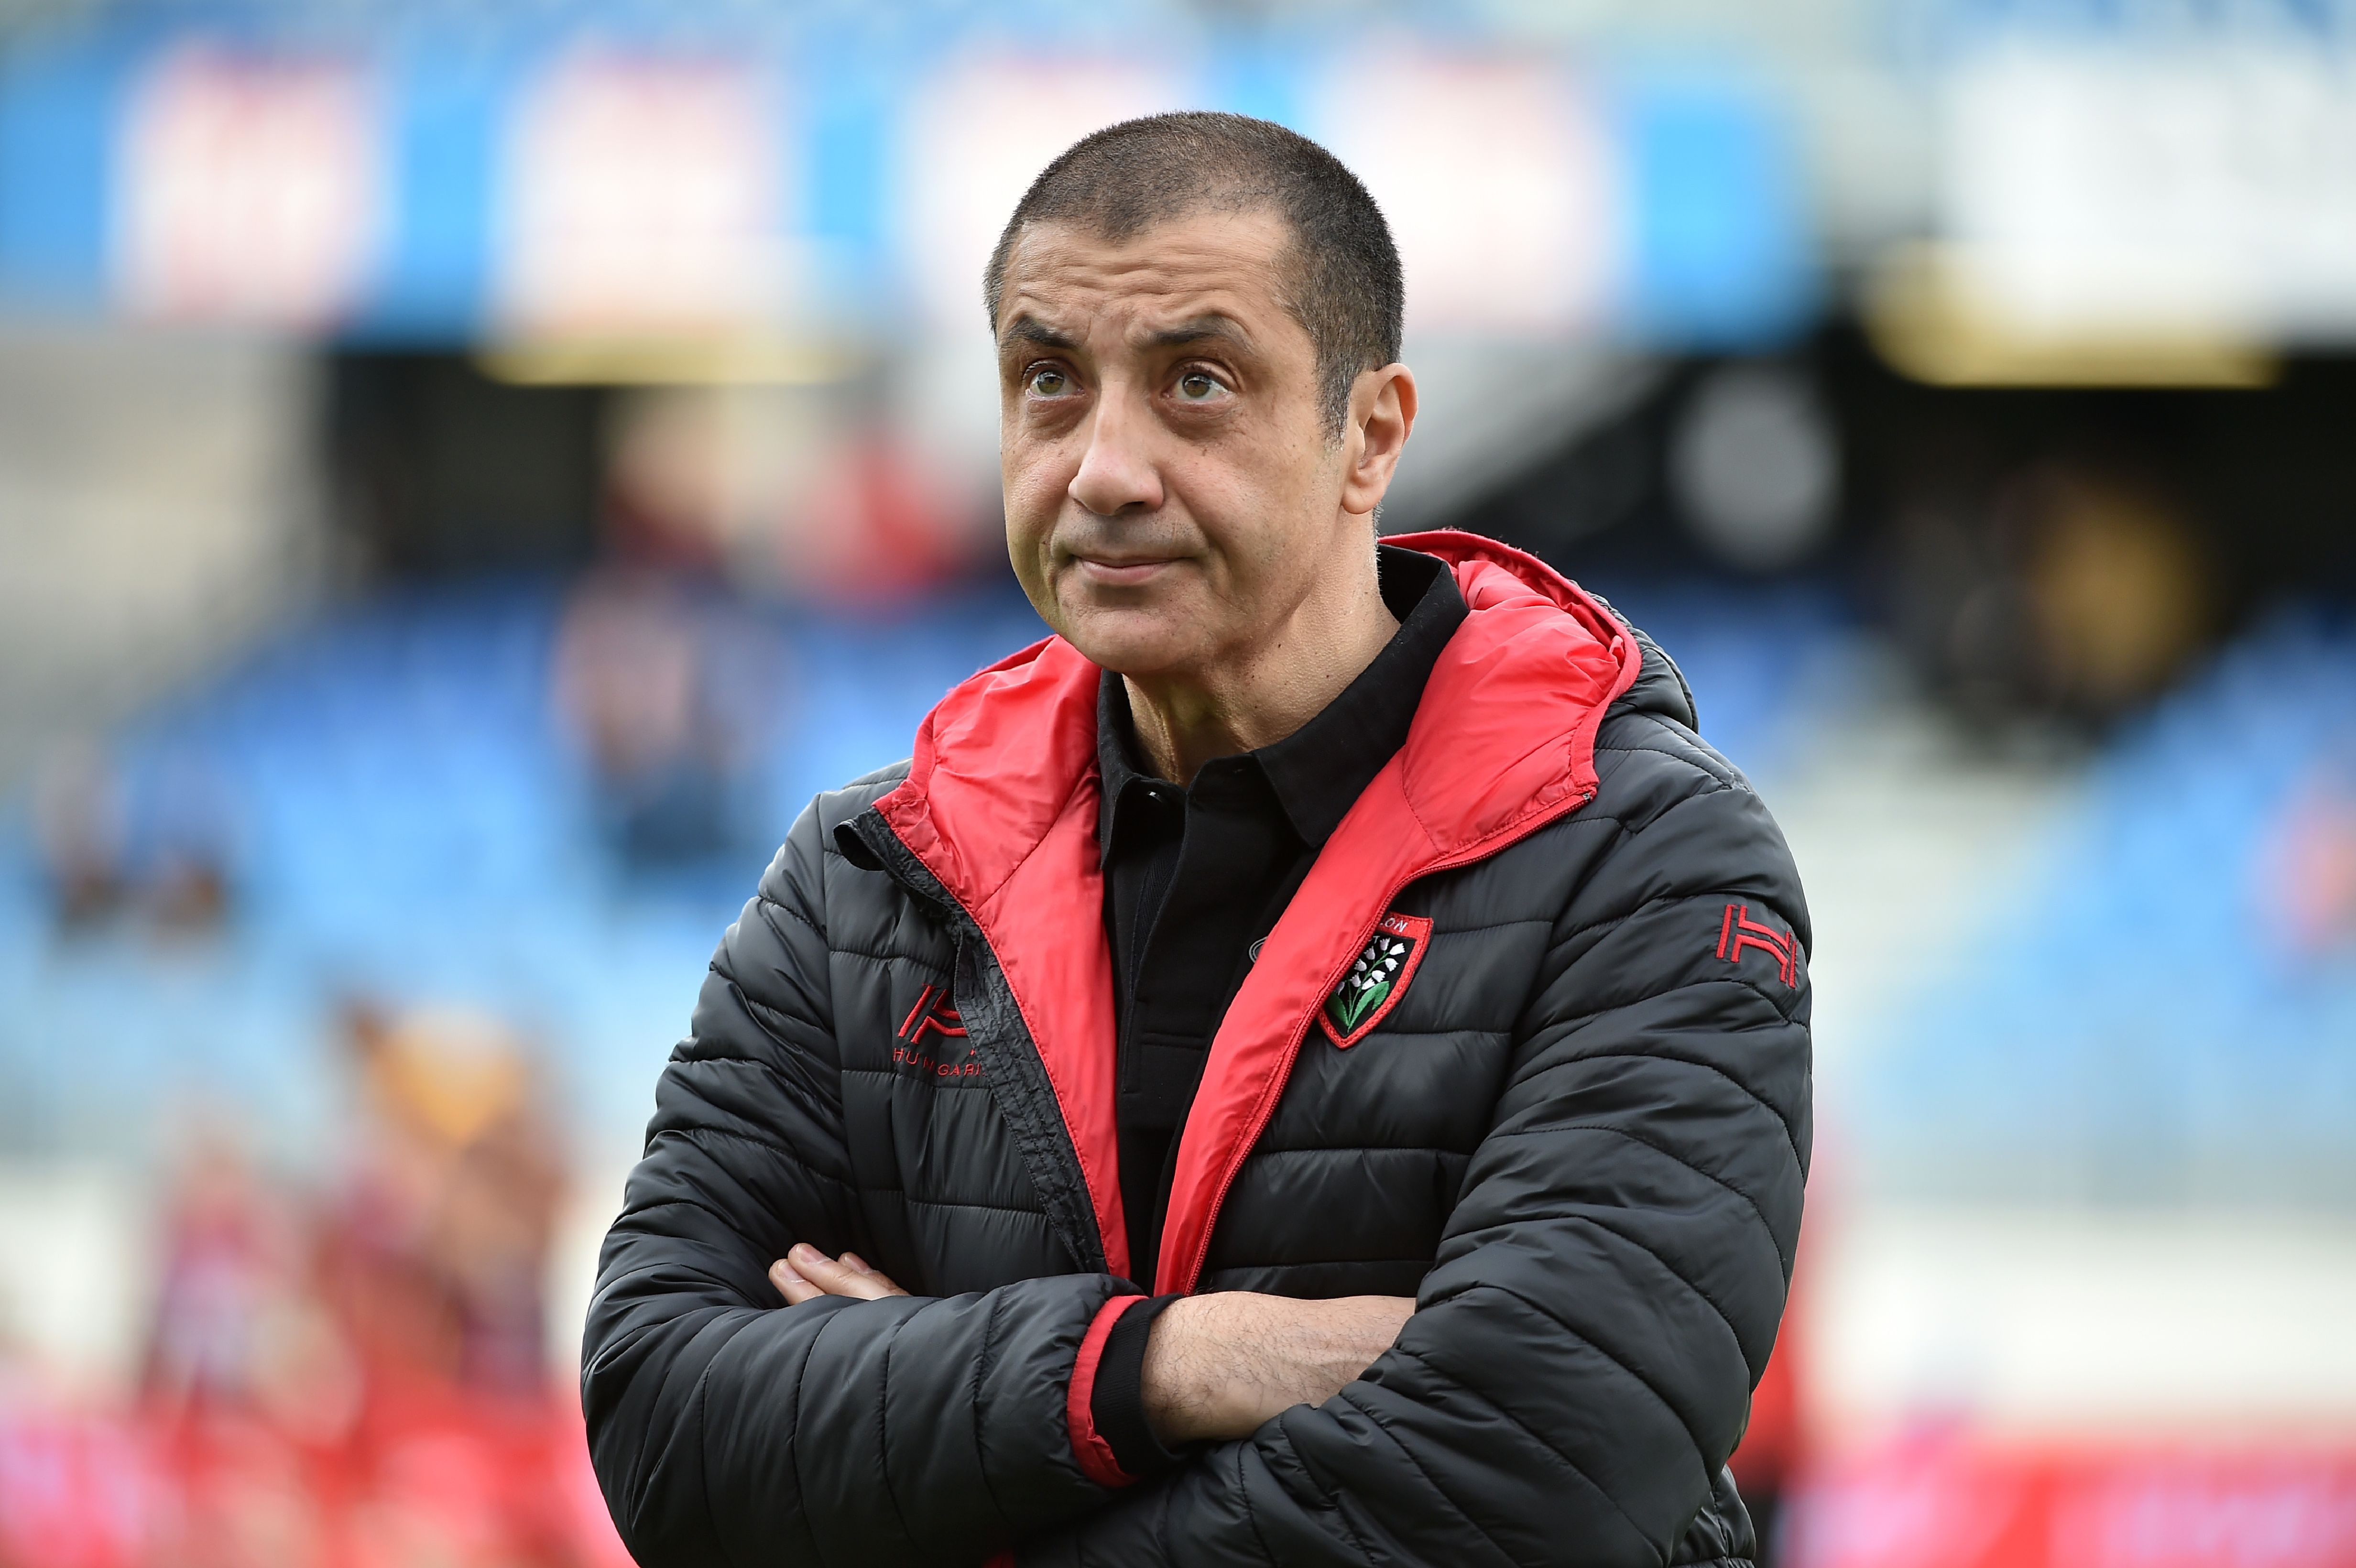 Toulon president Mourad Boudjellal is in hot water. Photo: AFP